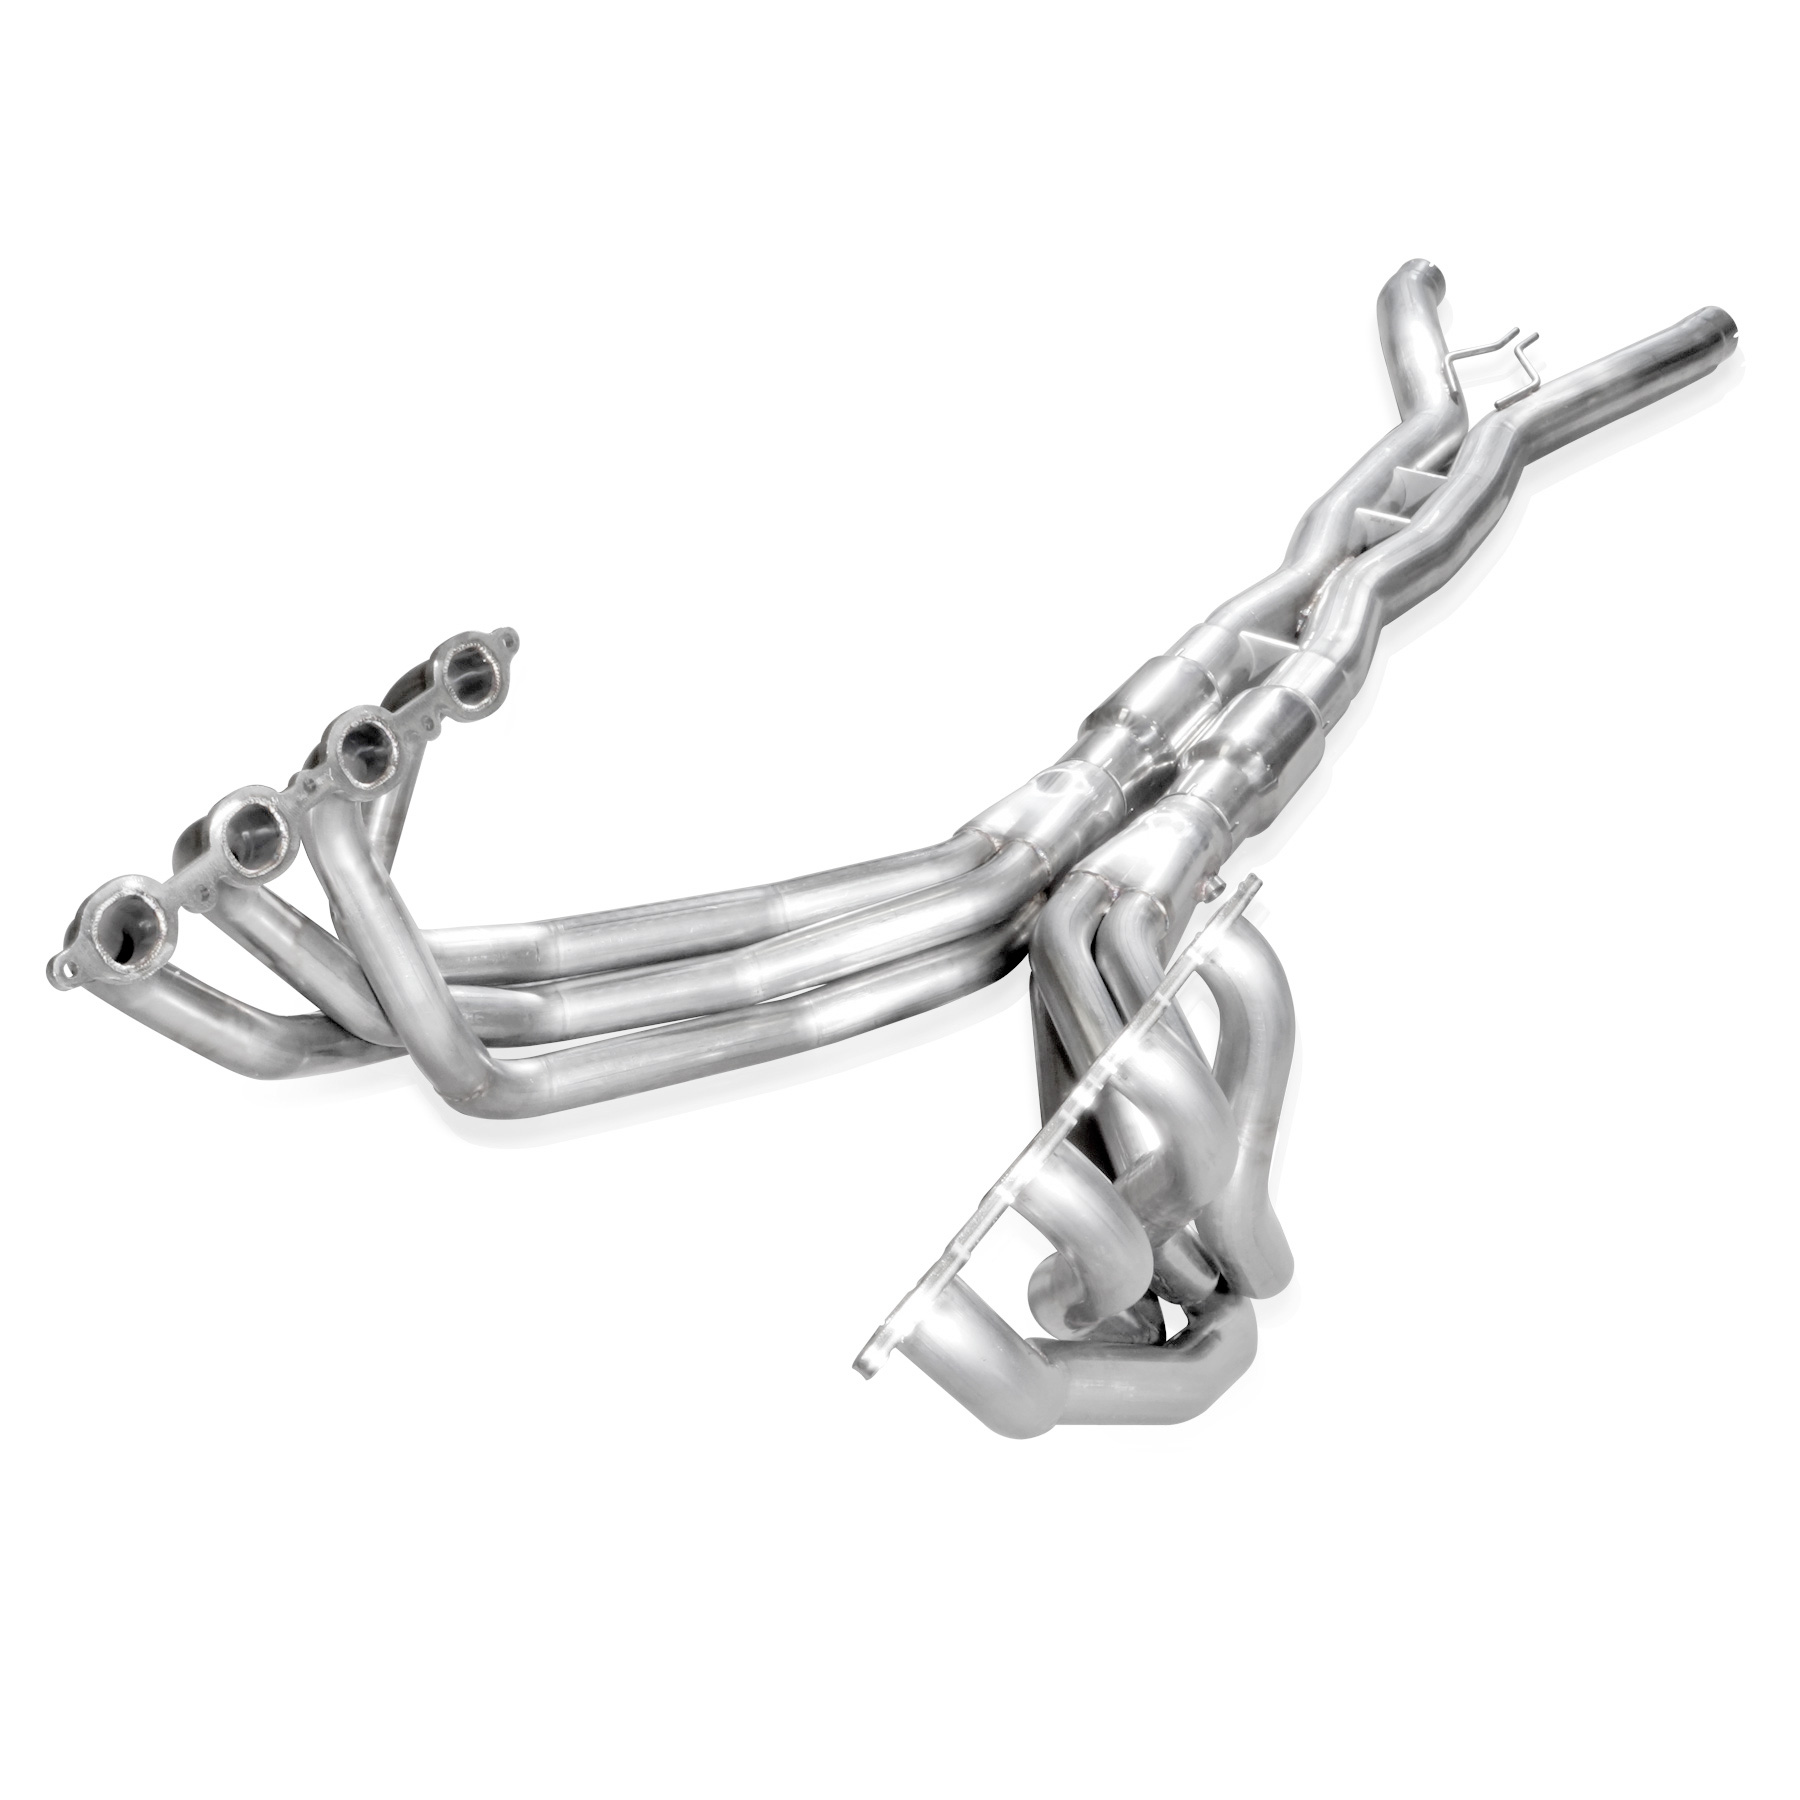 2014-2019 Corvette C7 6.2L SW Headers 1-7/8" With Catted Leads Factory Connect